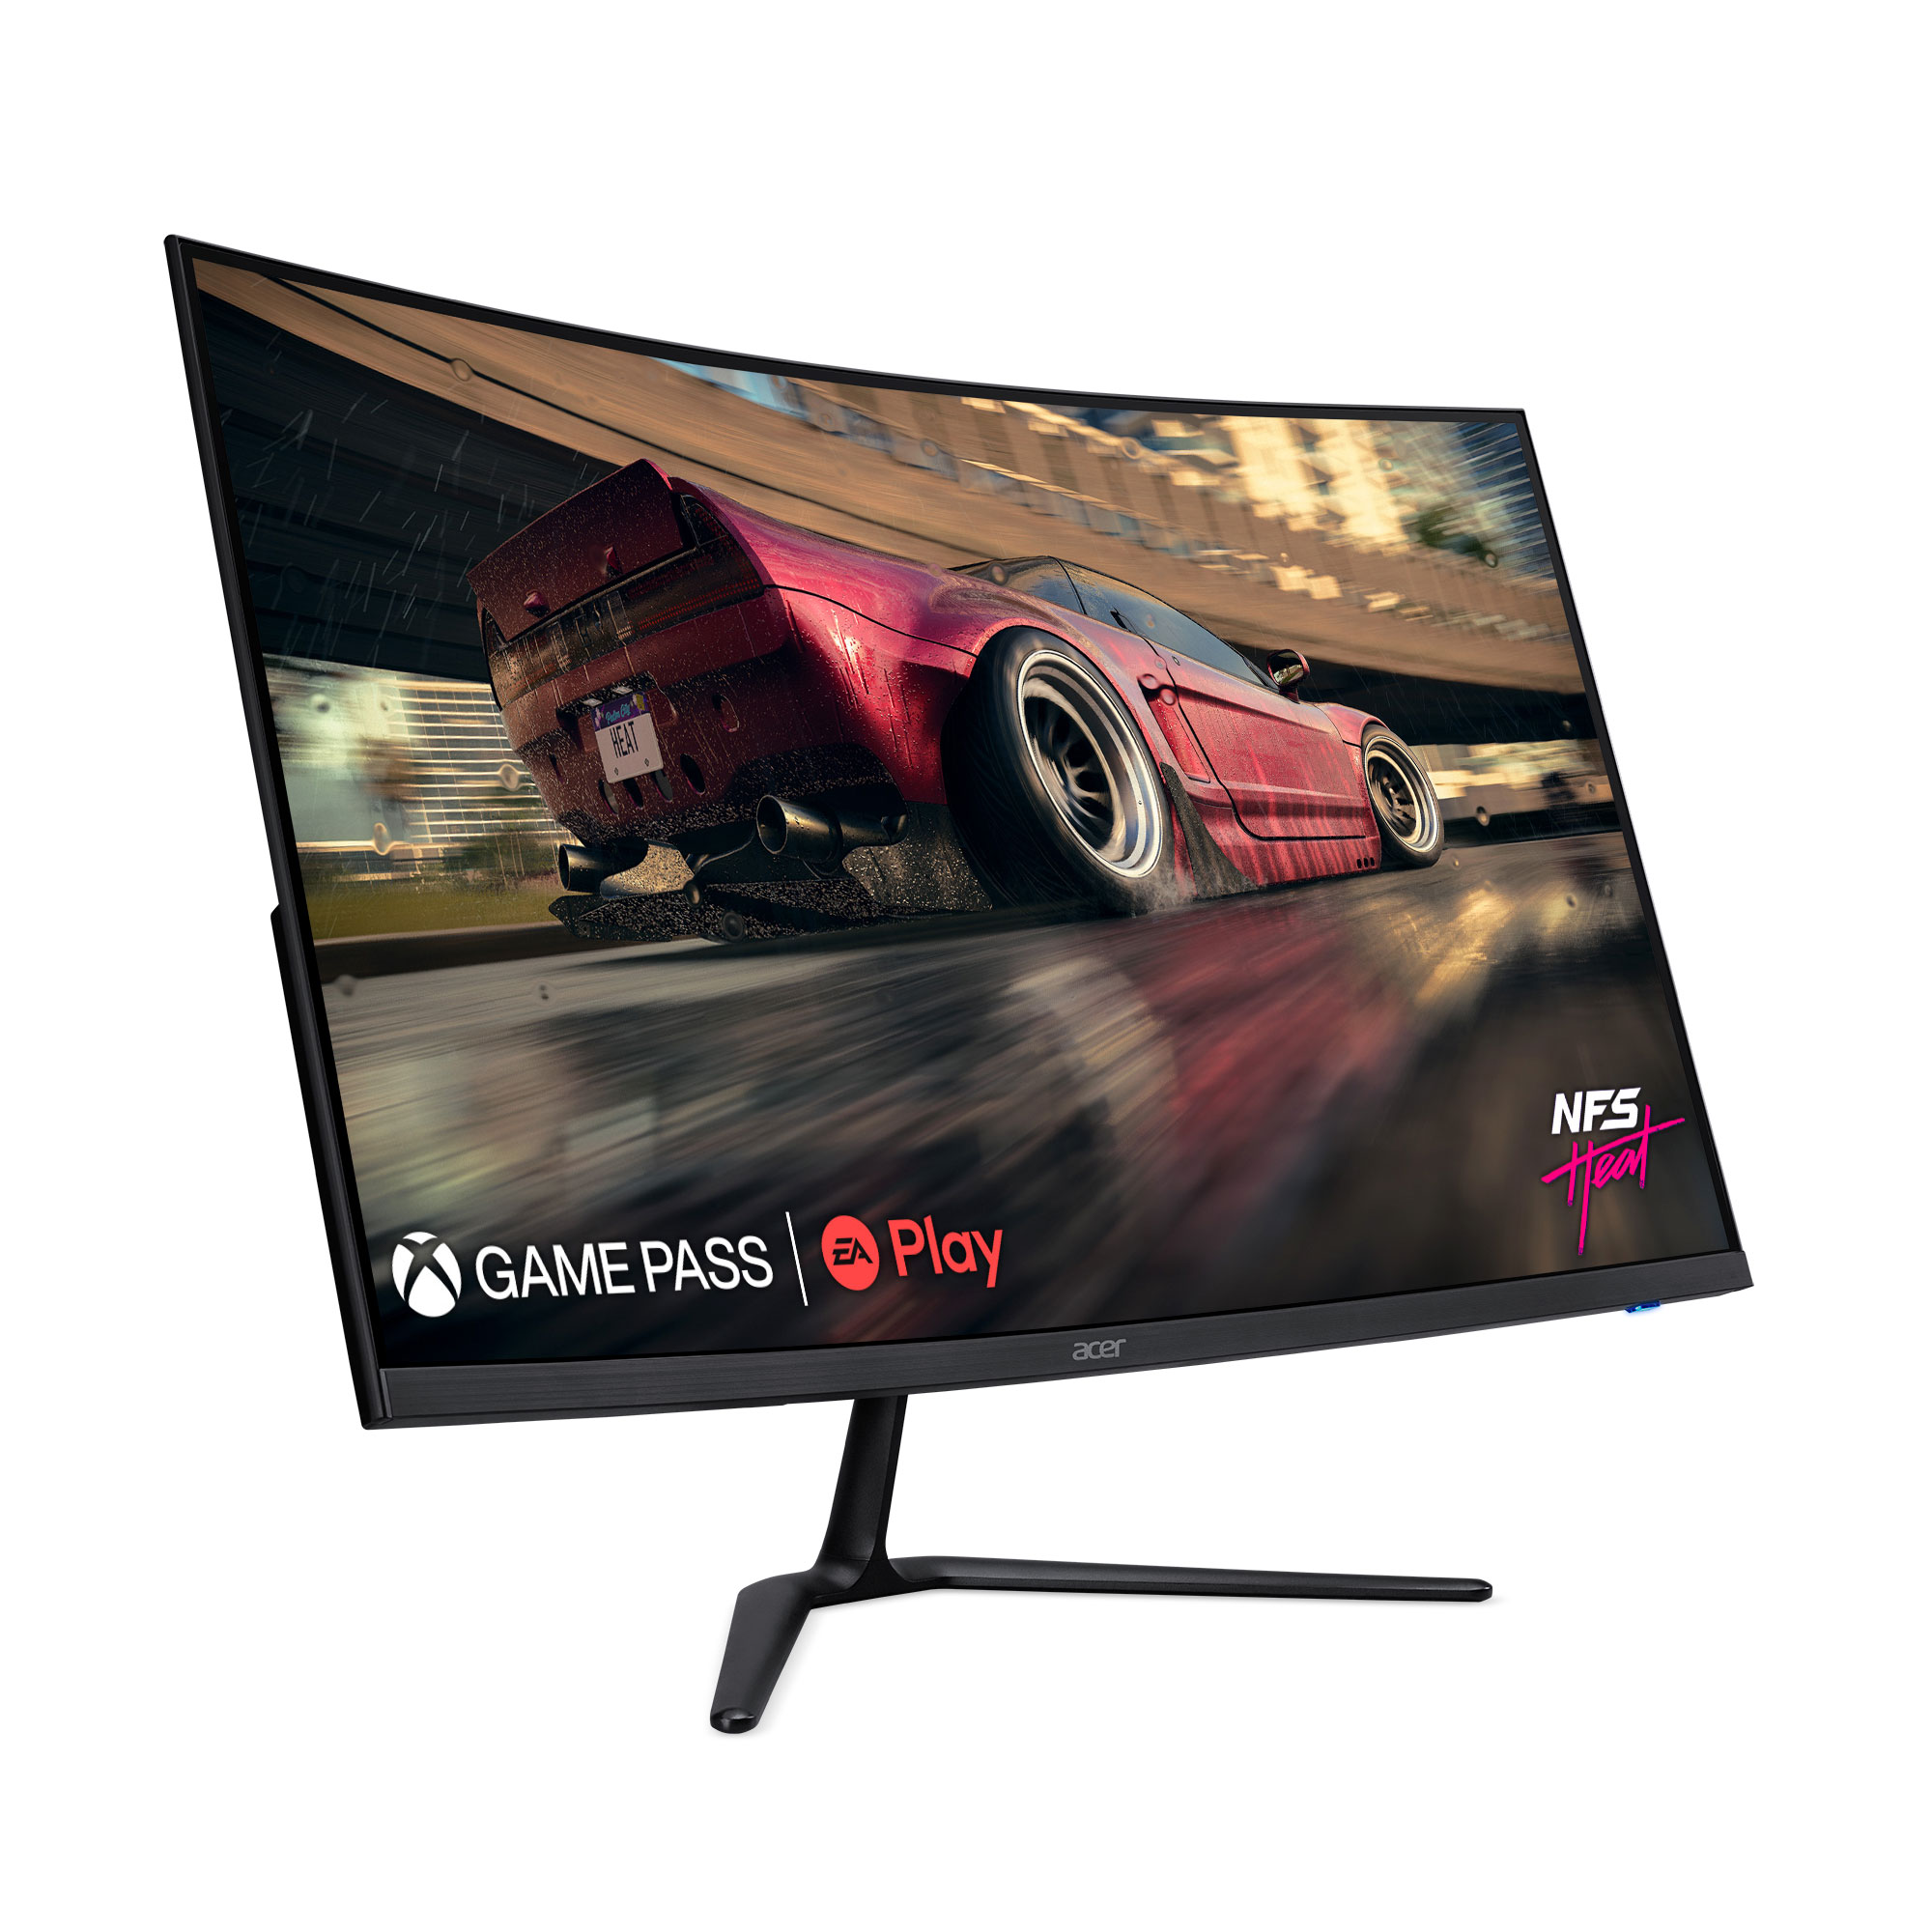 Acer Nitro 31.5" 1500R Curved Full HD (1920 x 1080) Gaming Monitor, Black, ED320QR S3biipx - image 2 of 8